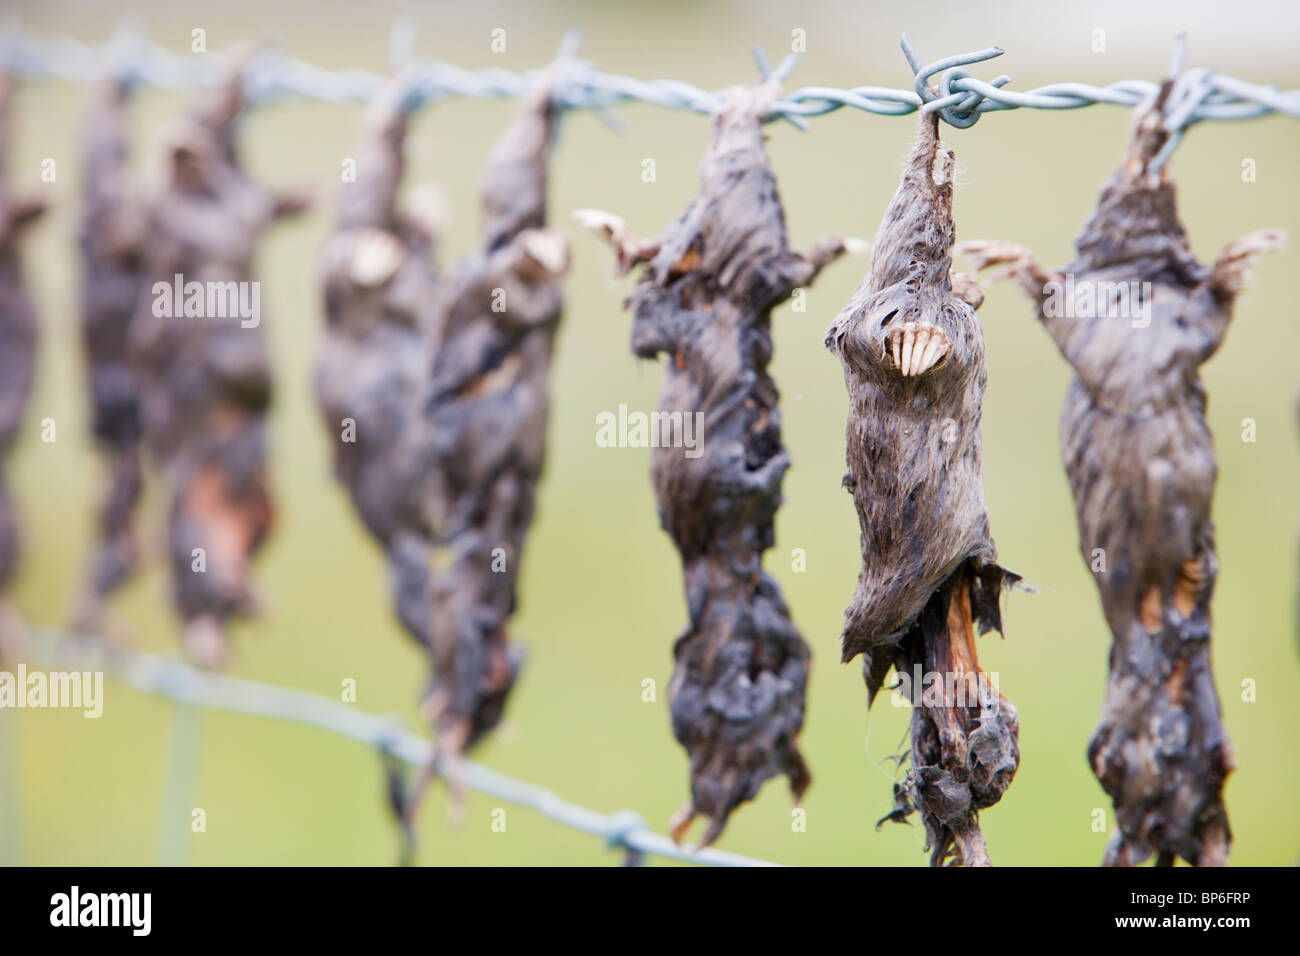 Moles hanging on a fence in Wet Sleddale near Shap, Cumbria, UK. Stock Photo